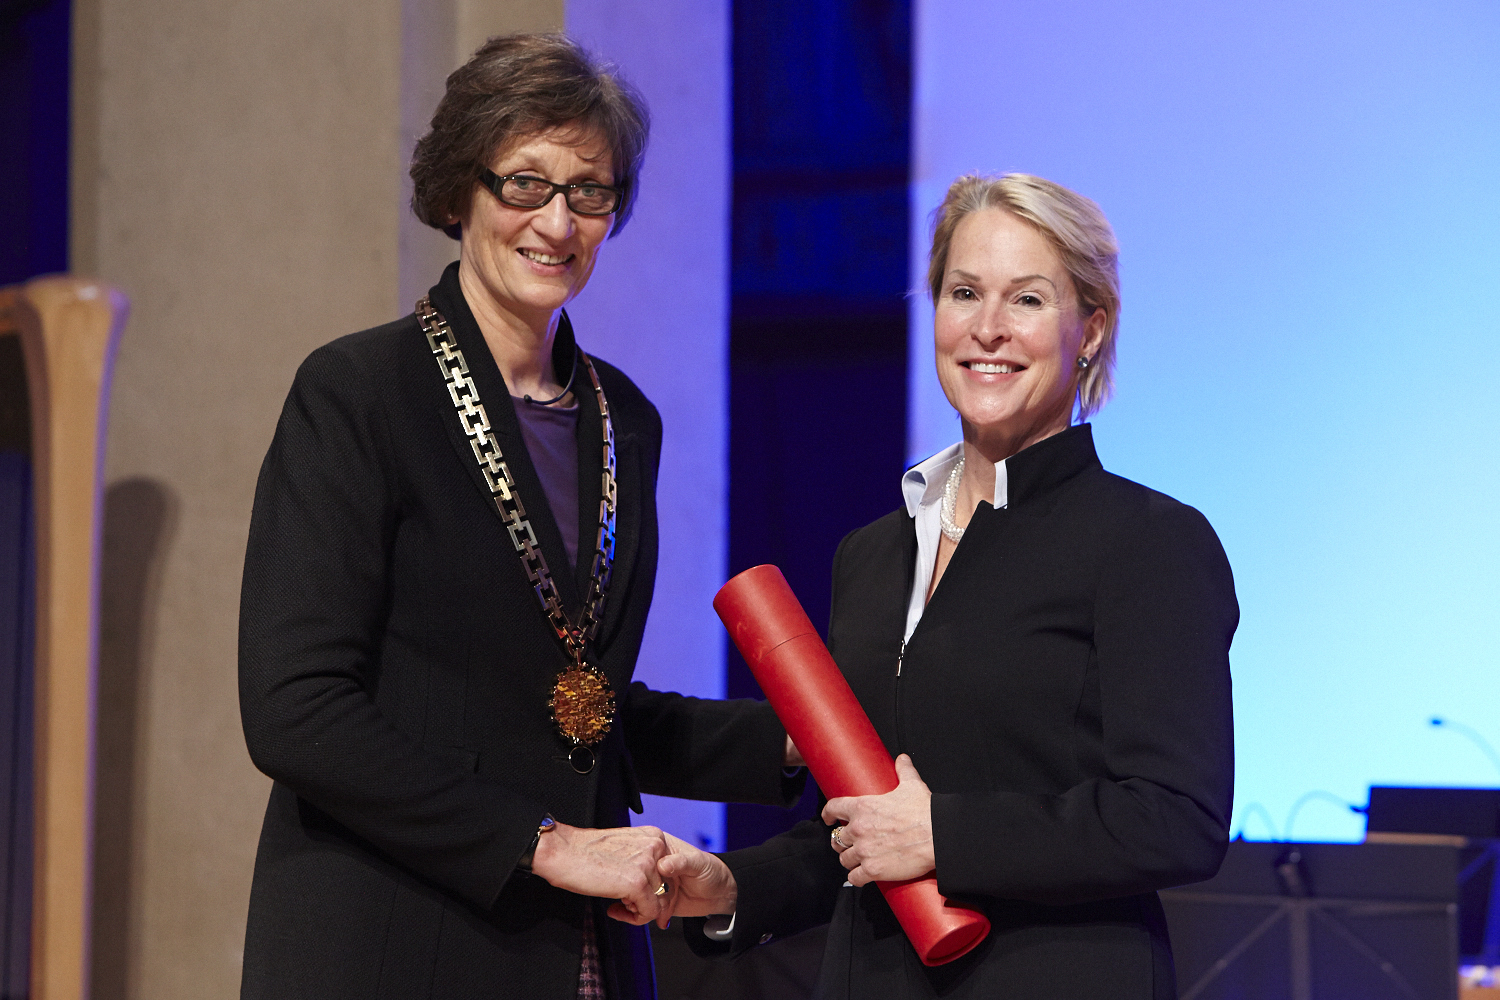 Enlarged view: ETH Rector Sarah Springman with Honorary Doctor Frances Arnold